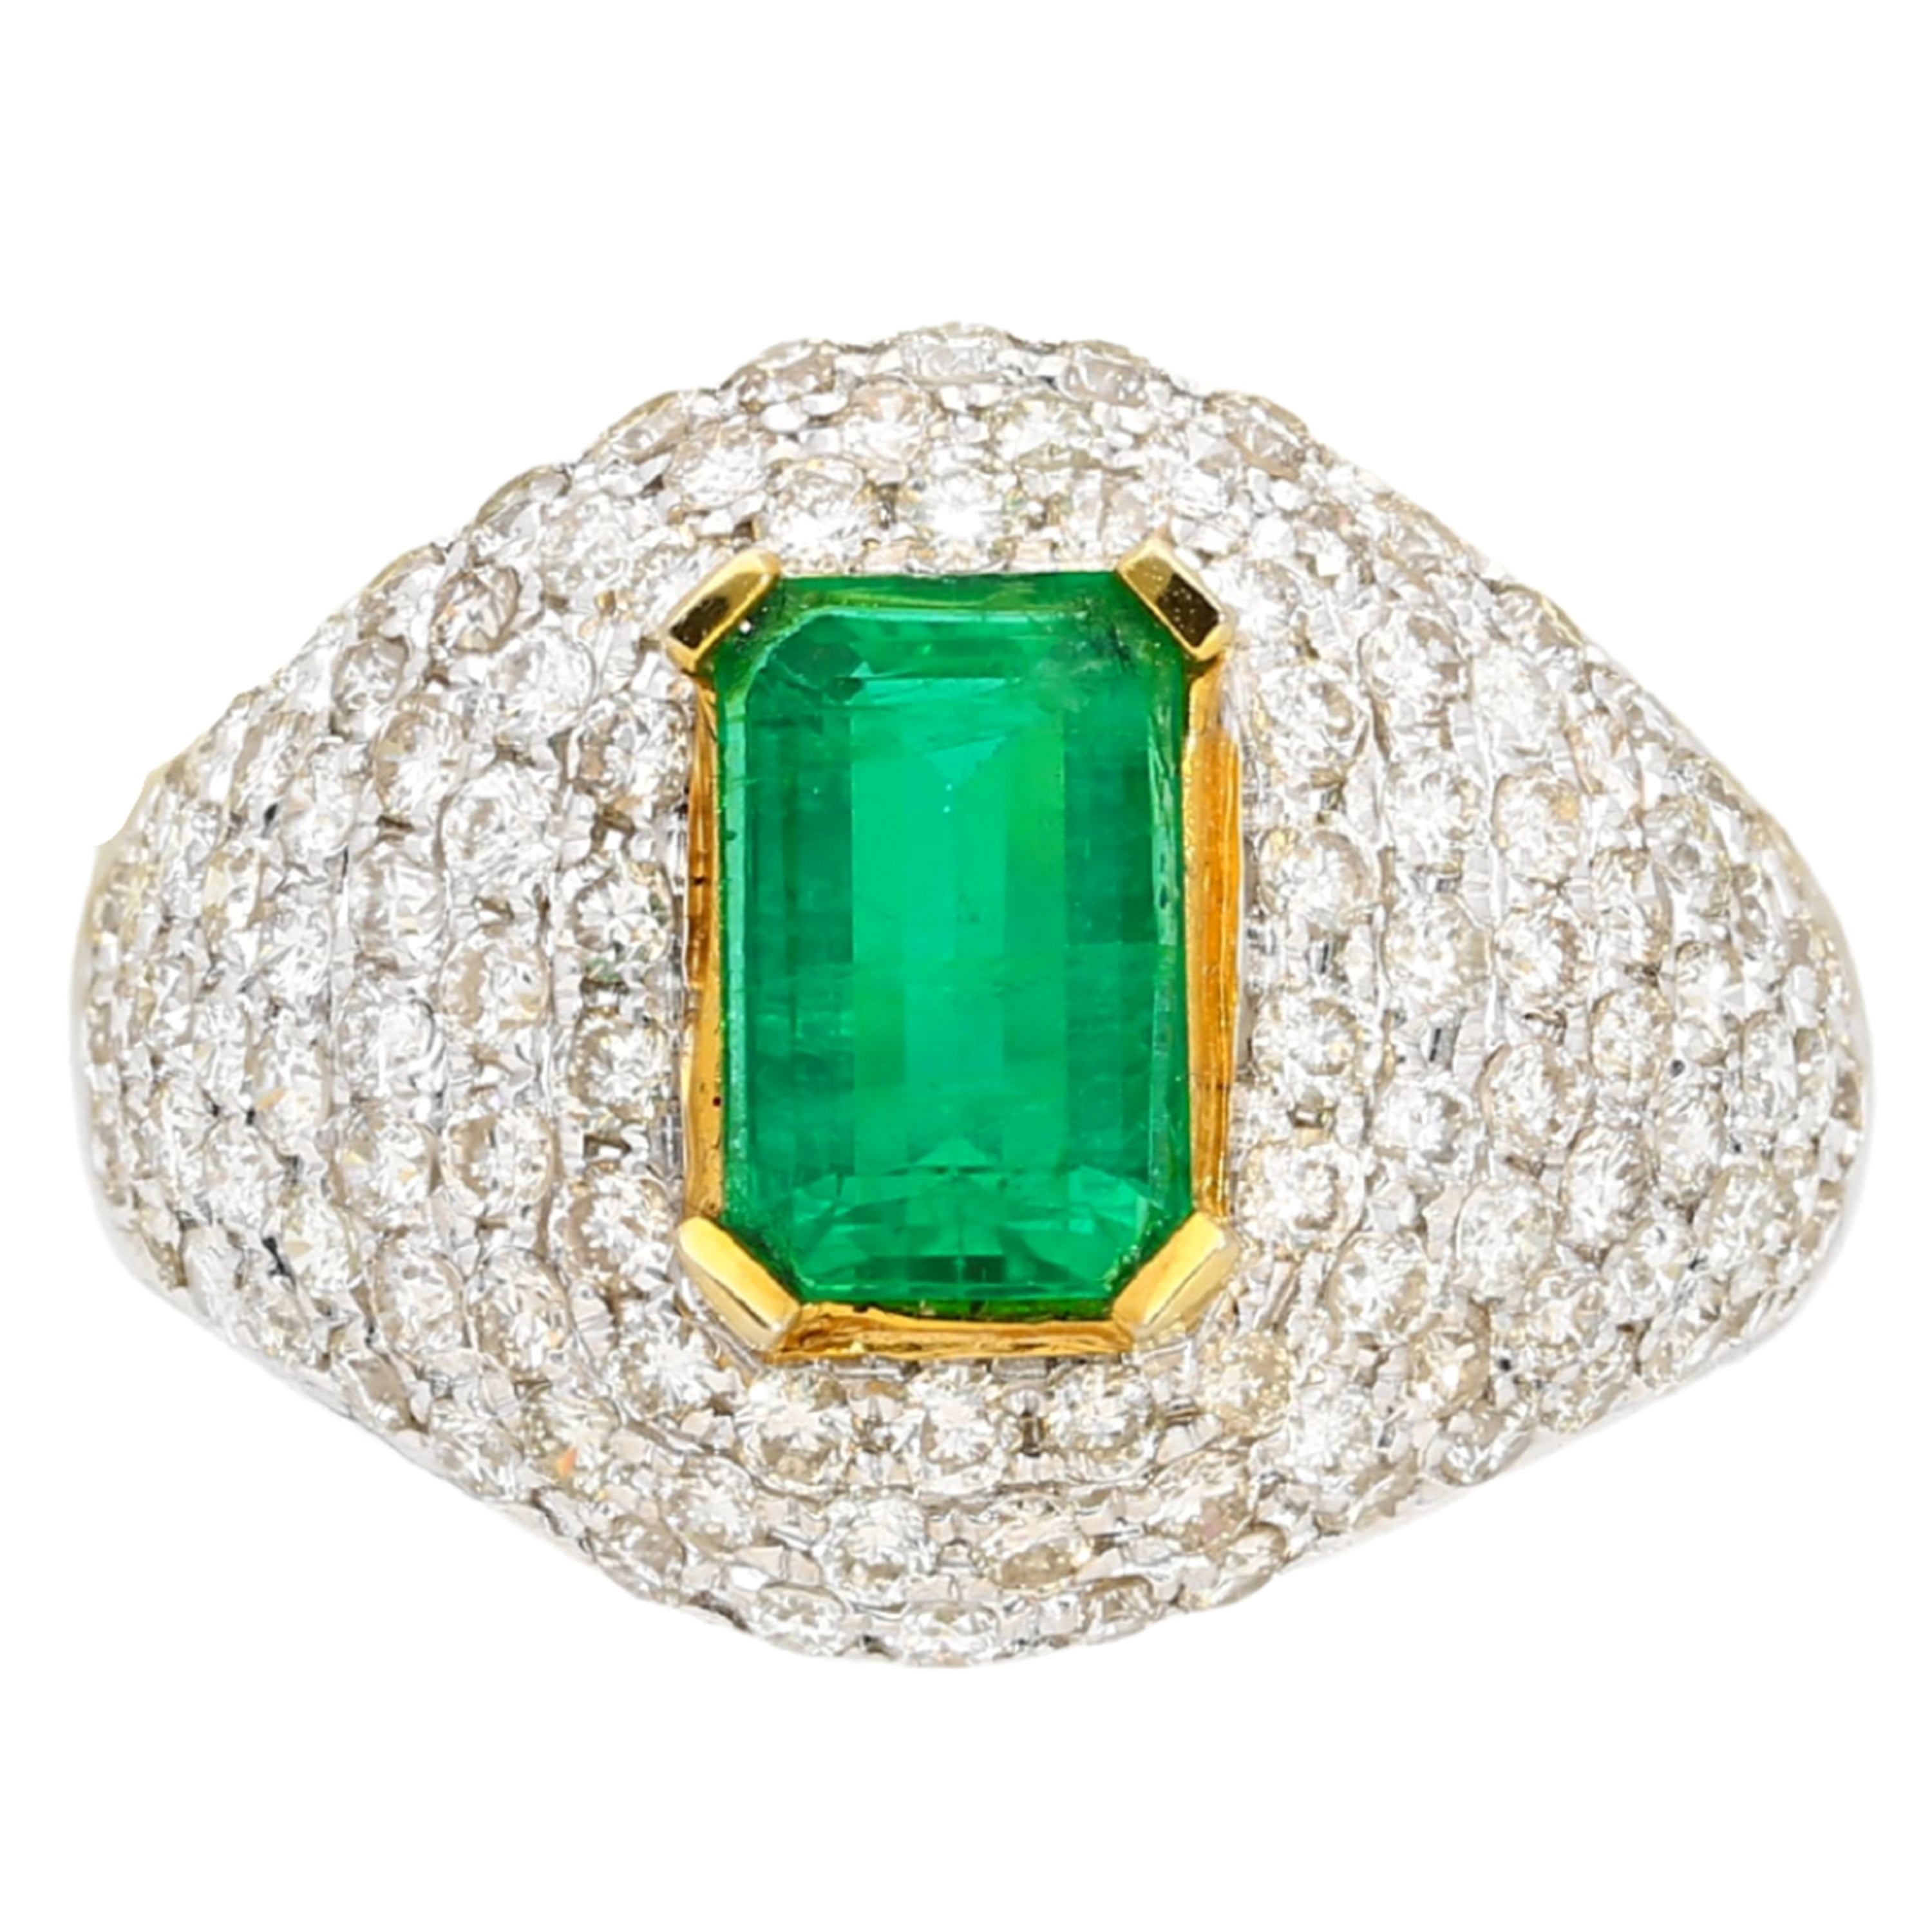 1.25 Carat Emerald Cut Emerald and White Diamond Cluster Ring in 18k White Gold For Sale